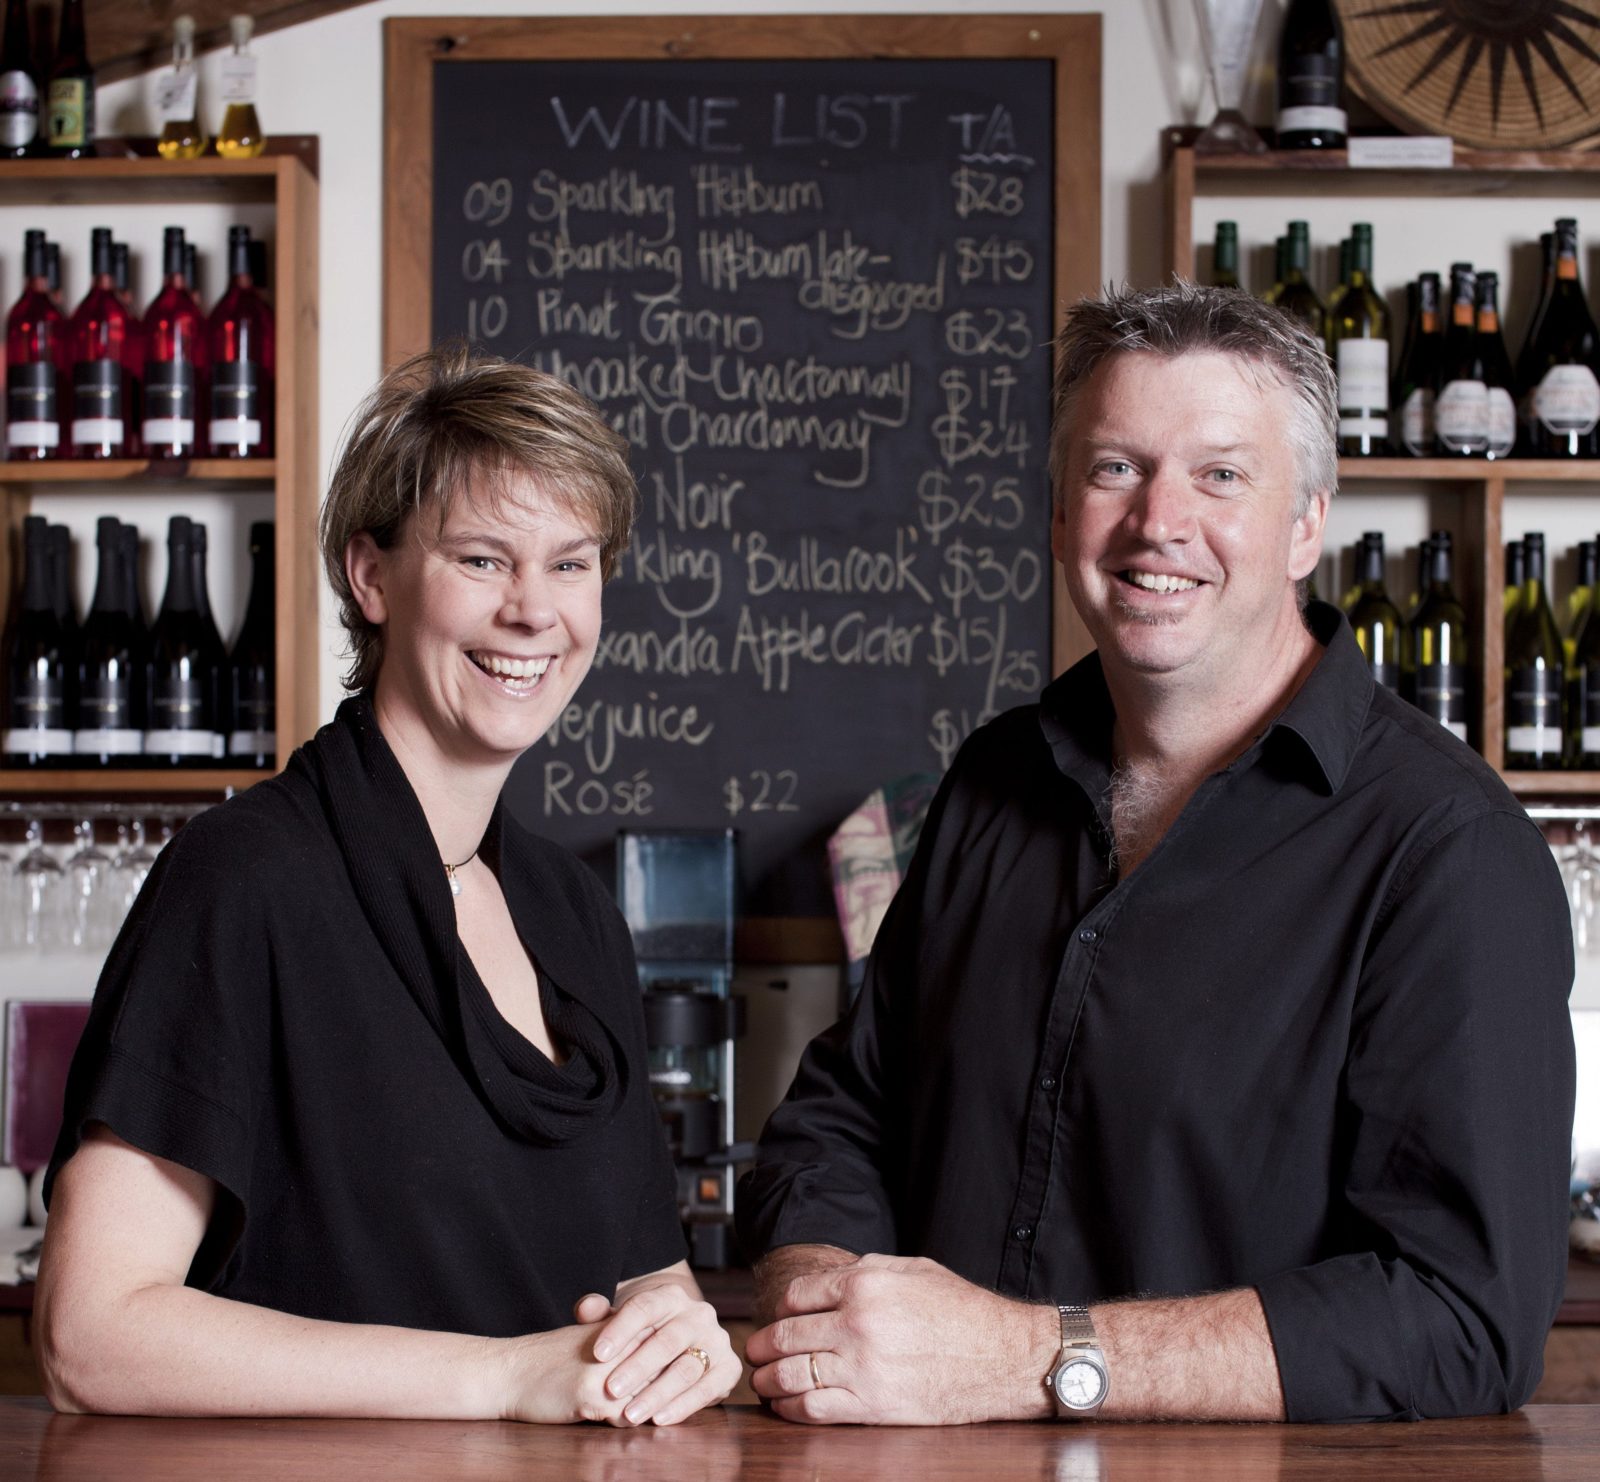 Meet the owners Carolyn and Doug May